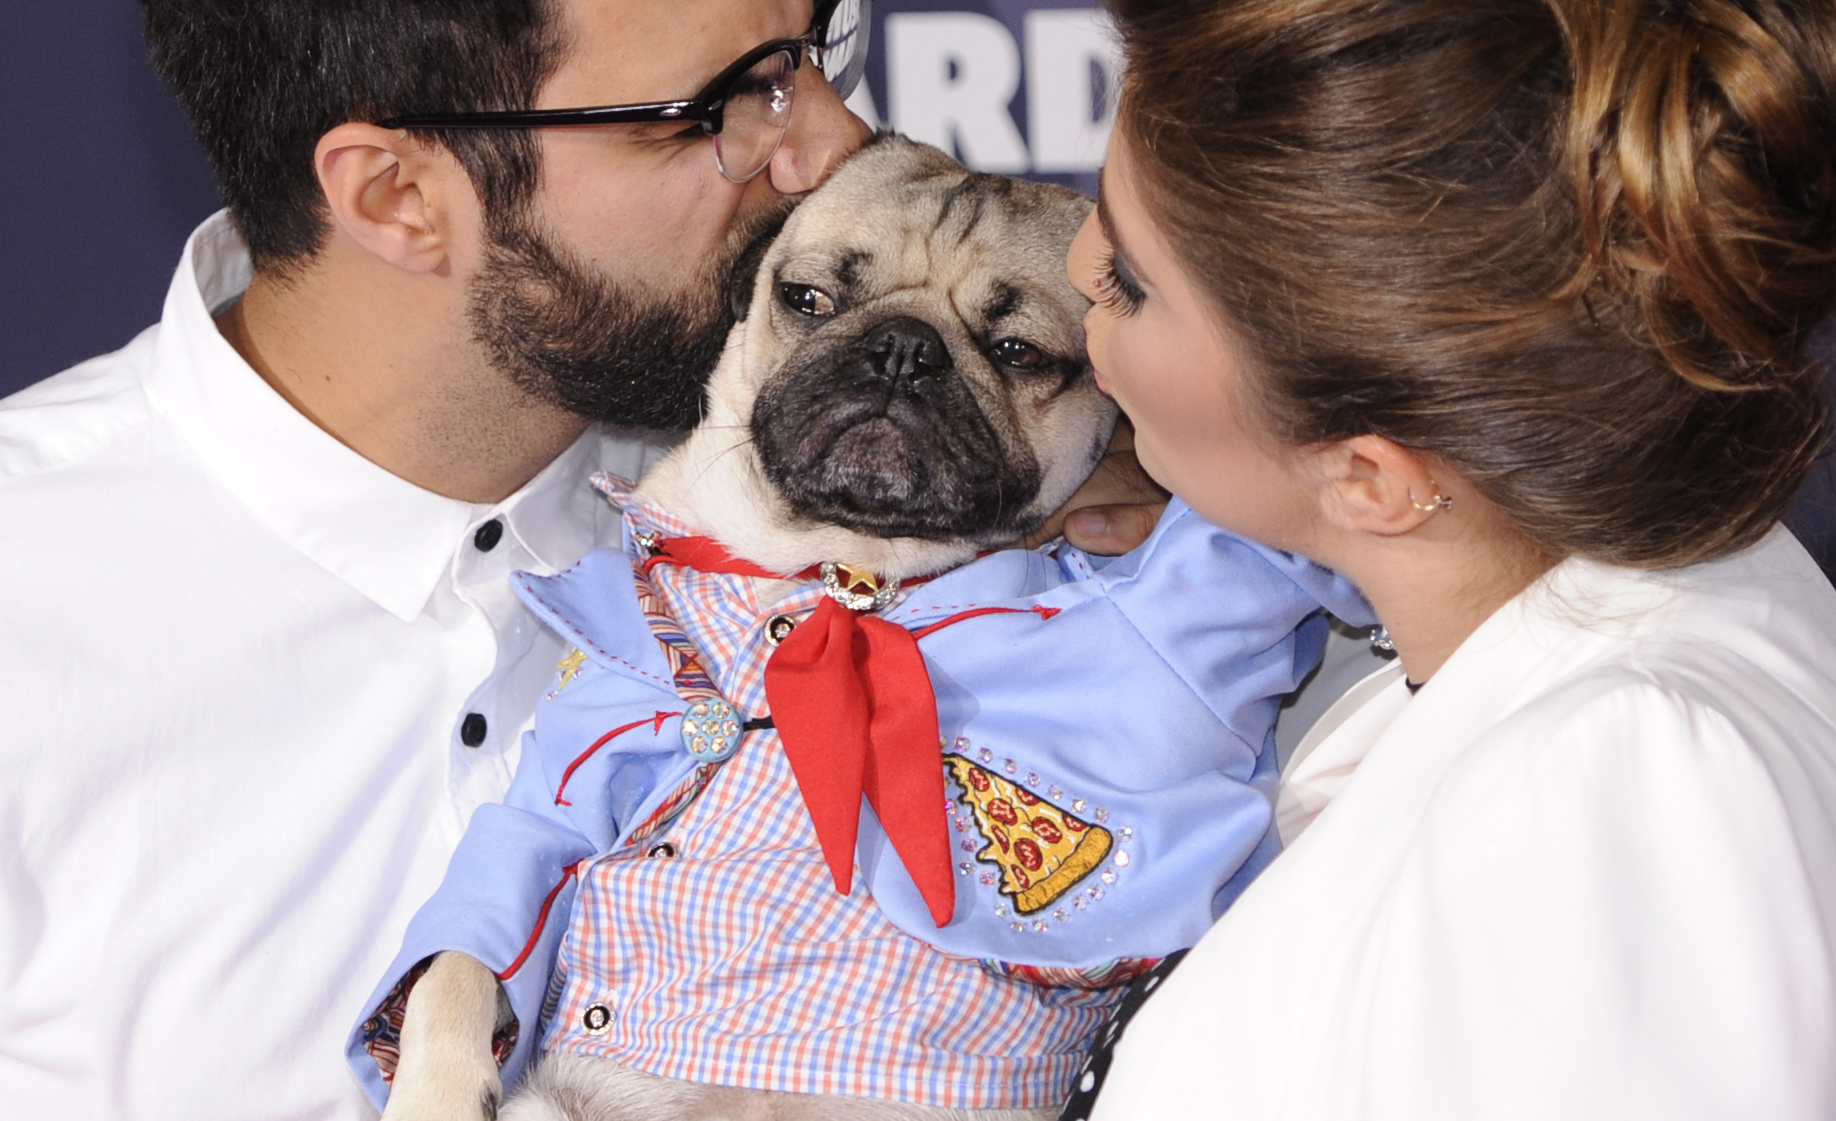 Rob Chianelli, left, and Leslie Mosier, right, kiss Doug the Pug as they arrive at the CMT Music Awards at the Bridgestone Arena on Wednesday, June 8, 2016, in Nashville, Tenn. (Photo by Sanford Myers/Invision/AP)